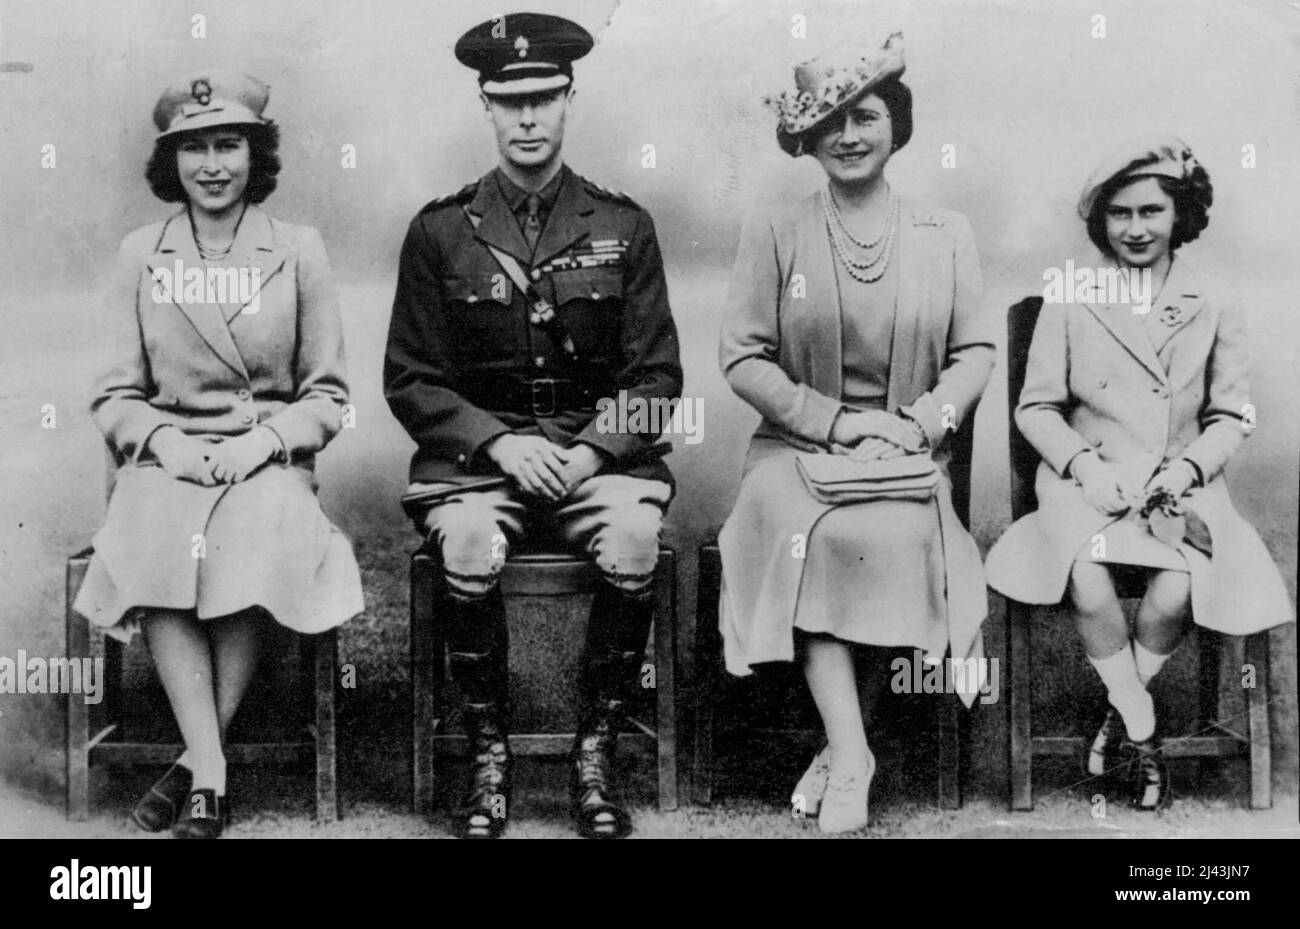 Britain's Royal Family -- A new and unpublished picture of their Majesties the King and Queen, with the two Princesses taken on the occasion of a visit to a Guards Depot, somewhere in England. October 23, 1942. (Photo by Fox Photos). Stock Photo